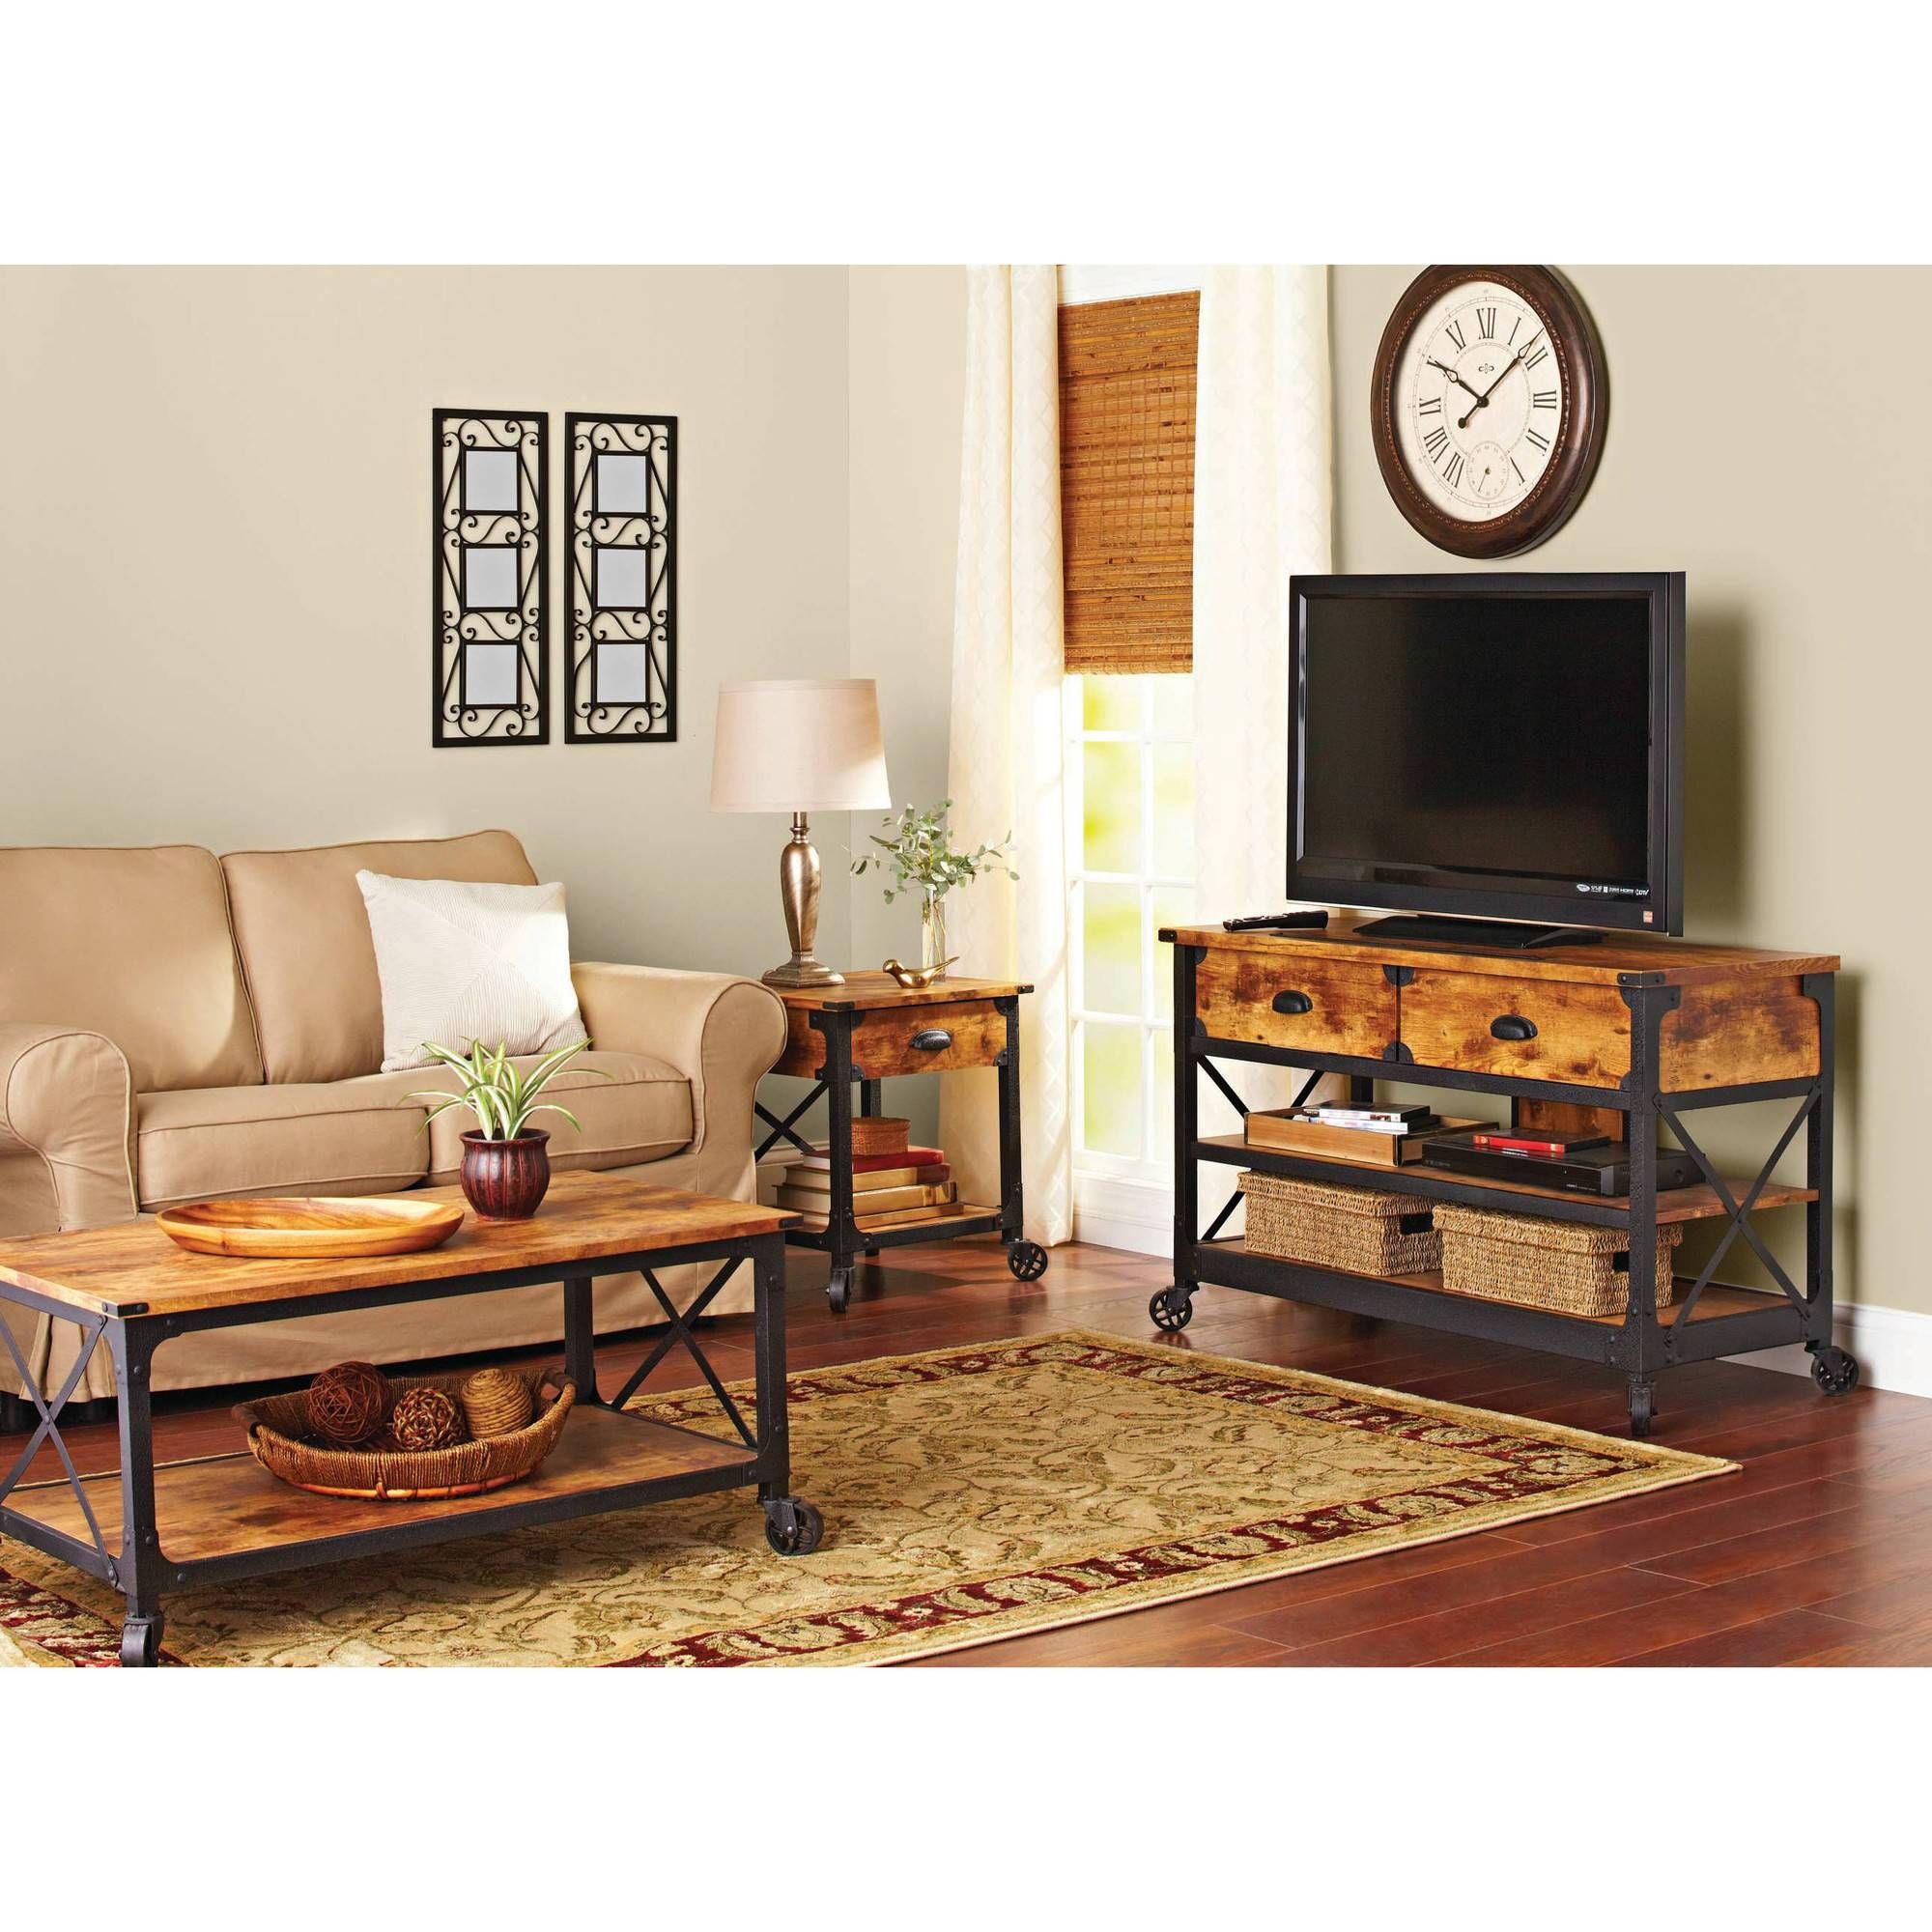 Matching Wooden Coffee Table And Tv Stand | Coffee Tables Decoration Throughout Rustic Coffee Tables And Tv Stands (View 2 of 30)